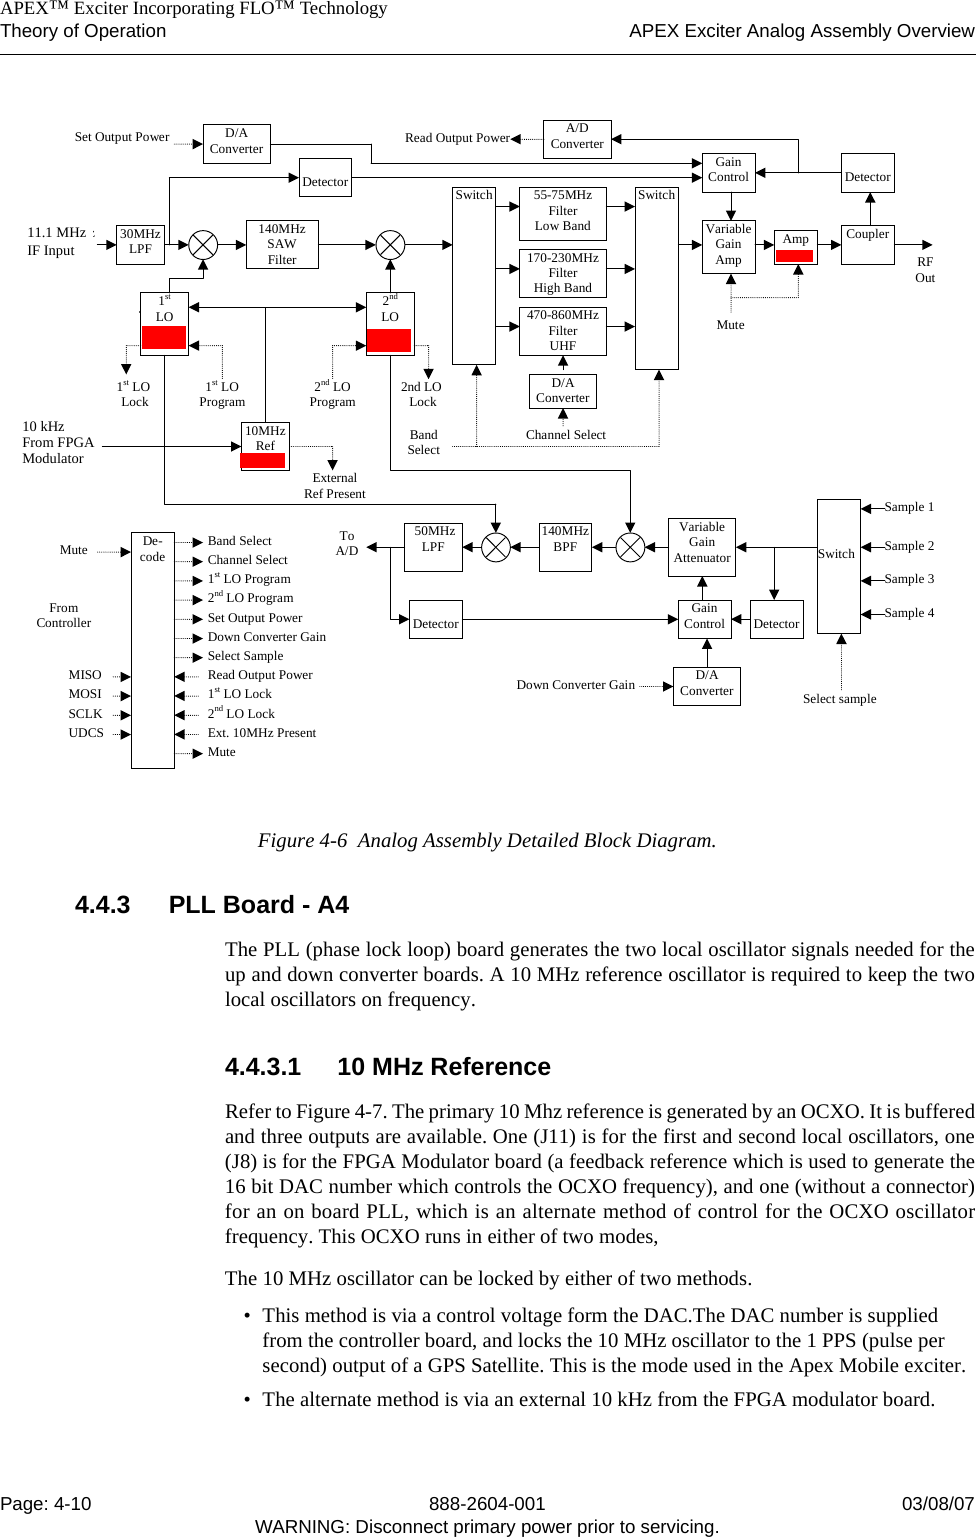    APEX™ Exciter Incorporating FLO™ TechnologyTheory of Operation APEX Exciter Analog Assembly OverviewPage: 4-10 888-2604-001 03/08/07WARNING: Disconnect primary power prior to servicing.Figure 4-6  Analog Assembly Detailed Block Diagram.4.4.3 PLL Board - A4The PLL (phase lock loop) board generates the two local oscillator signals needed for theup and down converter boards. A 10 MHz reference oscillator is required to keep the twolocal oscillators on frequency.4.4.3.1 10 MHz ReferenceRefer to Figure 4-7. The primary 10 Mhz reference is generated by an OCXO. It is bufferedand three outputs are available. One (J11) is for the first and second local oscillators, one(J8) is for the FPGA Modulator board (a feedback reference which is used to generate the16 bit DAC number which controls the OCXO frequency), and one (without a connector)for an on board PLL, which is an alternate method of control for the OCXO oscillatorfrequency. This OCXO runs in either of two modes, The 10 MHz oscillator can be locked by either of two methods.• This method is via a control voltage form the DAC.The DAC number is supplied from the controller board, and locks the 10 MHz oscillator to the 1 PPS (pulse per second) output of a GPS Satellite. This is the mode used in the Apex Mobile exciter.• The alternate method is via an external 10 kHz from the FPGA modulator board.1stLO140MHzSAWFilter2ndLOVariableGainAmp55-75MHzFilterLow Band AmpDetectorCouplerGainControlRFOutFromController170-230MHzFilterHigh Band470-860MHzFilterUHFSwitch Switch140MHzBPF 50MHzLPFVariableGainAttenuatorSample 110.76MHzInputSwitch Sample 2Sample 3D/AConverterToA/DSample 410MHzRef10.76MHzClockExternal10MHzD/AConverterDe-codeDown Converter GainDown Converter GainSet Output PowerA/DConverterRead Output PowerBandSelect Channel Select2nd LOProgram1st LOProgramBand SelectChannel SelectSet Output Power1st LO Program2nd LO ProgramRead Output PowerSelect SampleSelect sample1st LO Lock 2nd LO Lock1st LO Lock2nd LO LockExternalRef PresentD/AConverterExt. 10MHz PresentMuteMuteMuteUDCSSCLKMISOMOSI30MHzLPFDetectorDanielsonsLast Revision10/6/00Detector DetectorGainControl11.1 MHzIF Input10 kHzFrom FPGAModulator